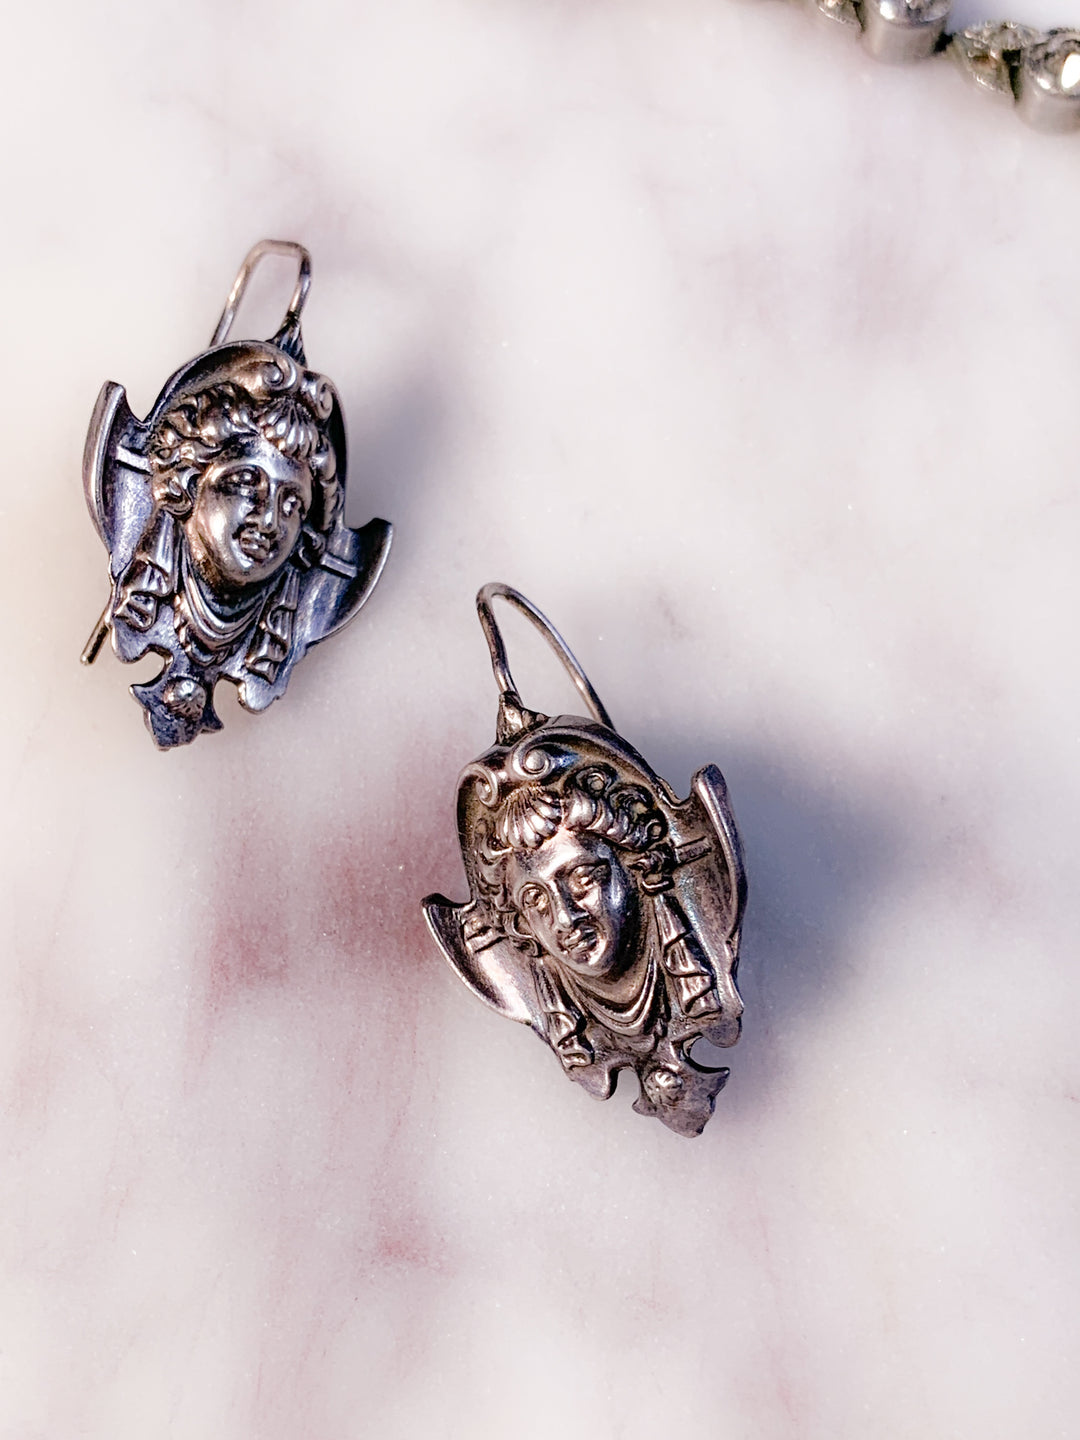 Stunning Renaissance Revival Earrings with Gorgeous Victorian Visages